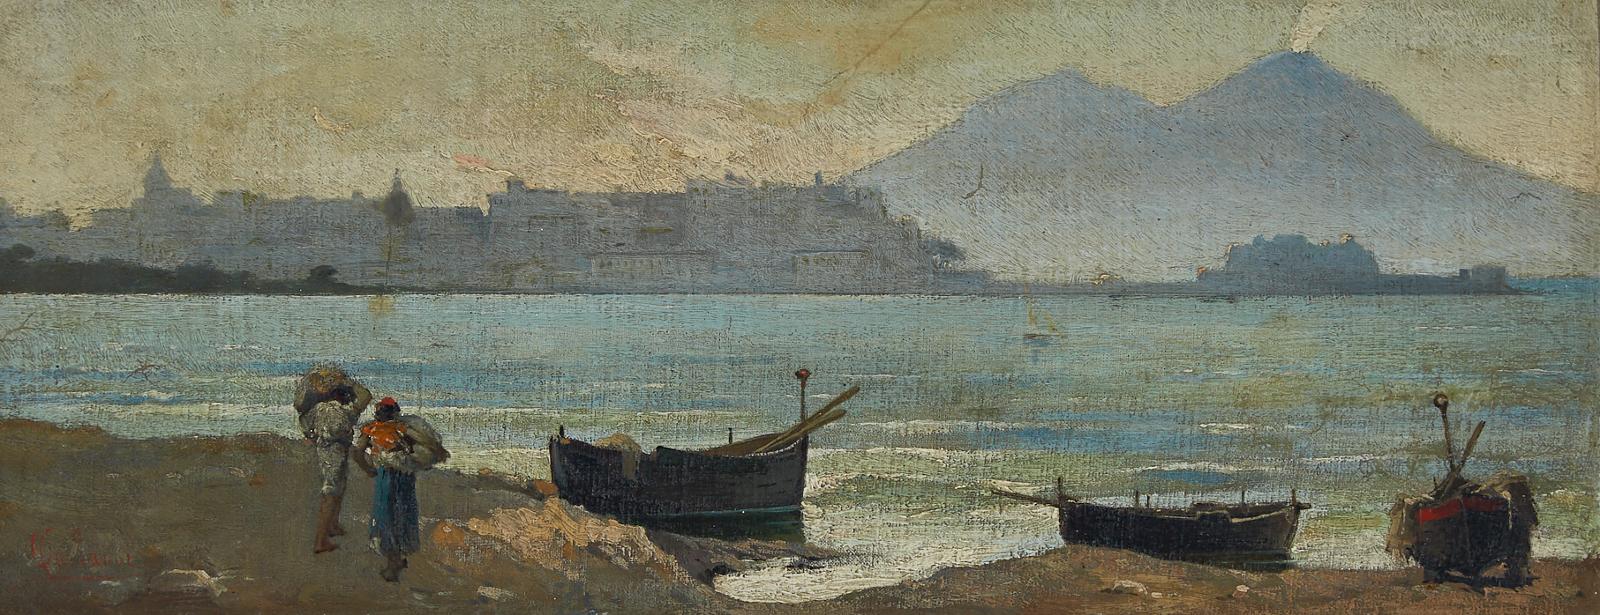 Onorato Carlandi (1848-1939) - View Of Naples Harbour With Mt. Vesuvius In Distance